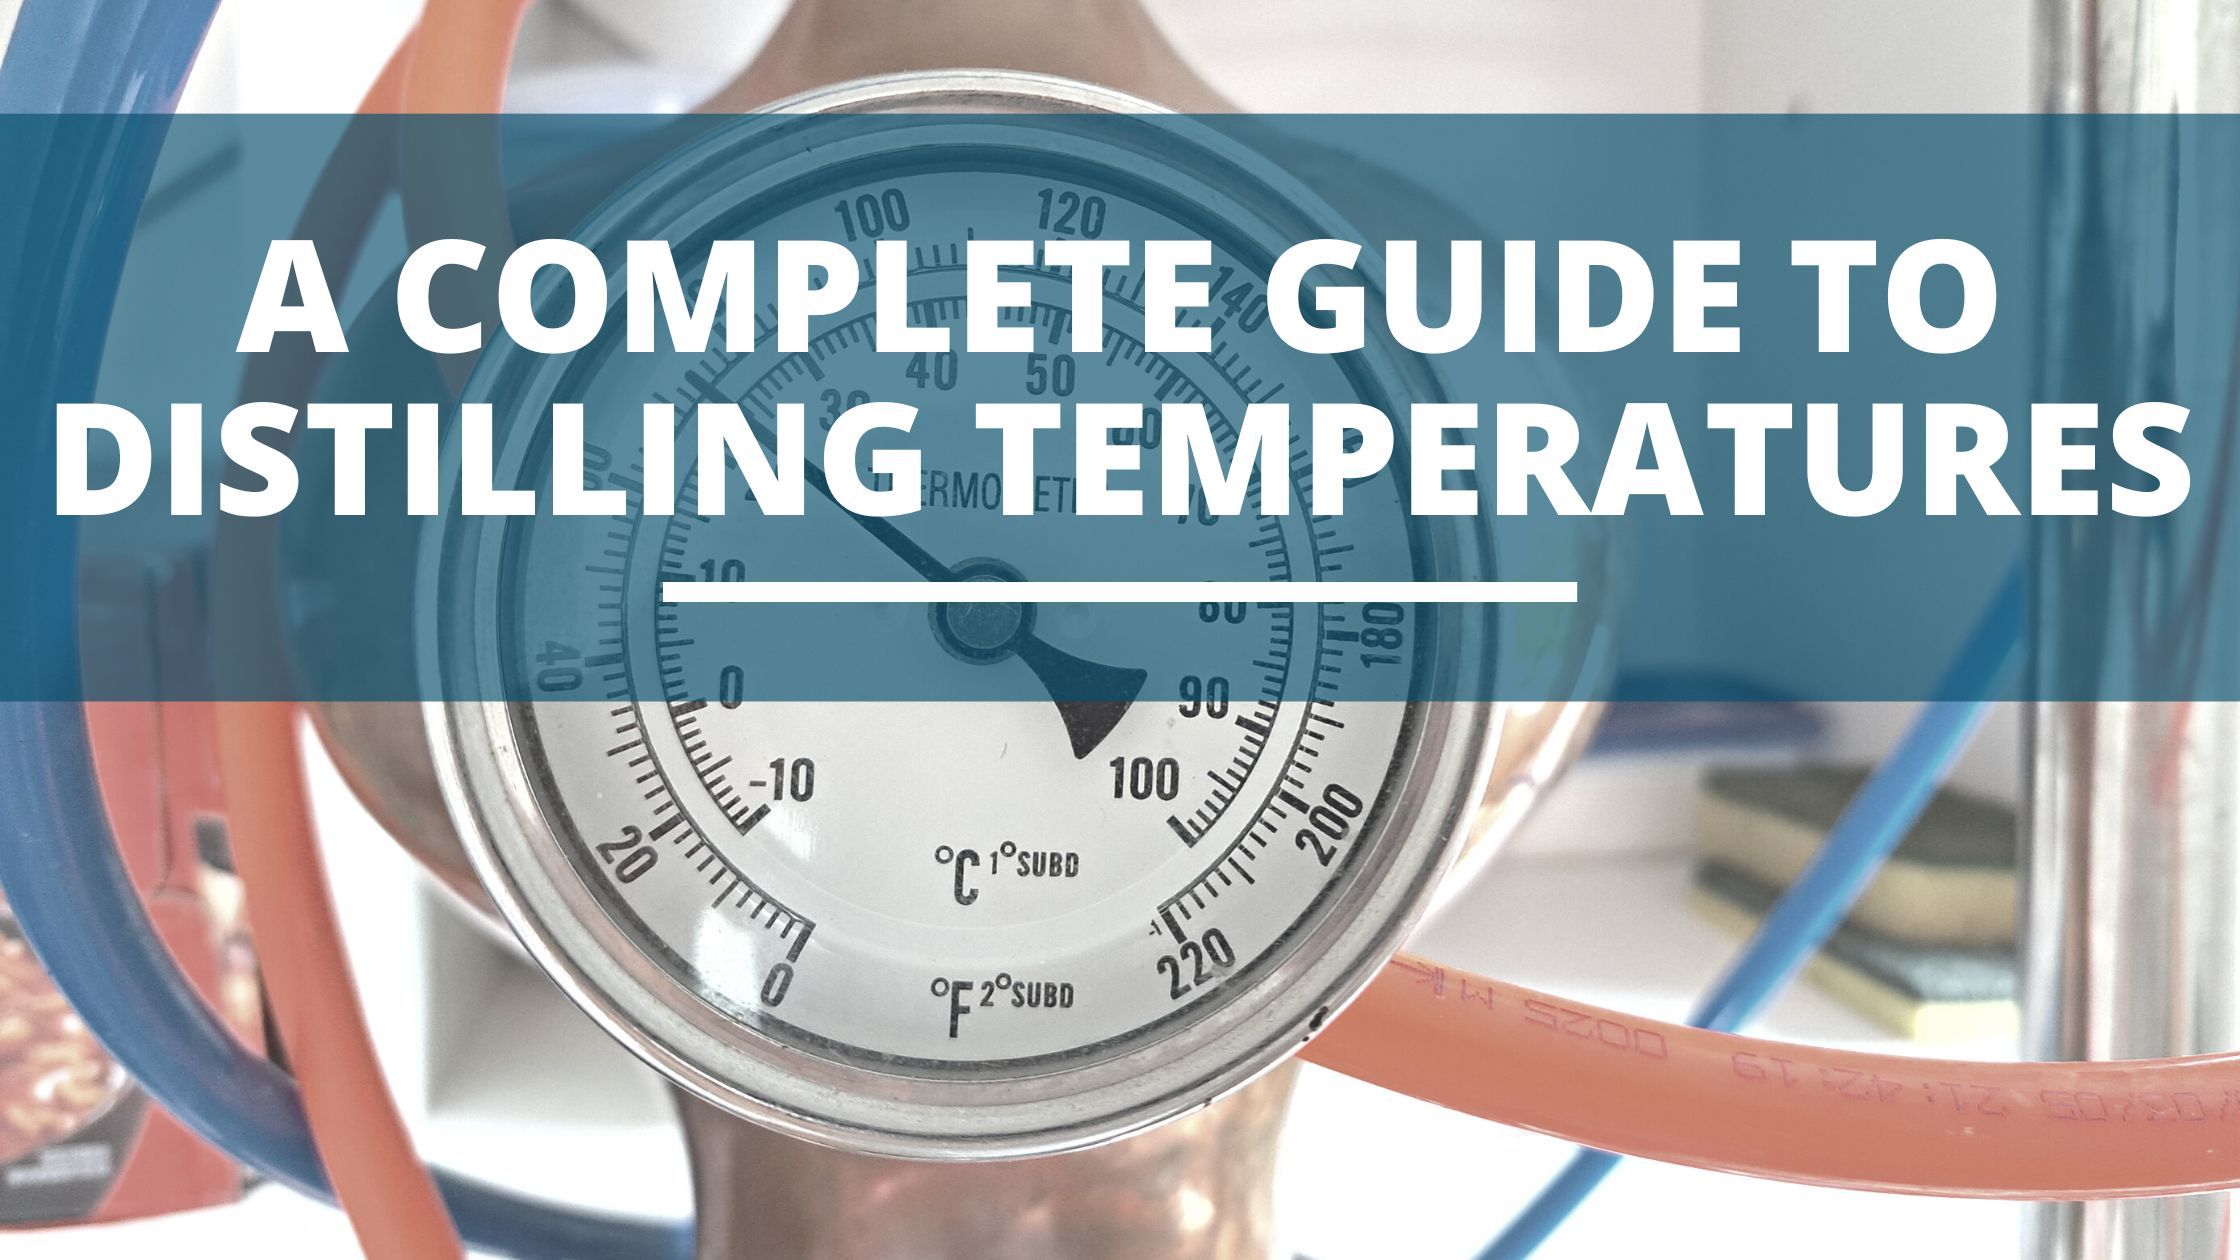 Image of diy distilling what is the best temperature for distilling